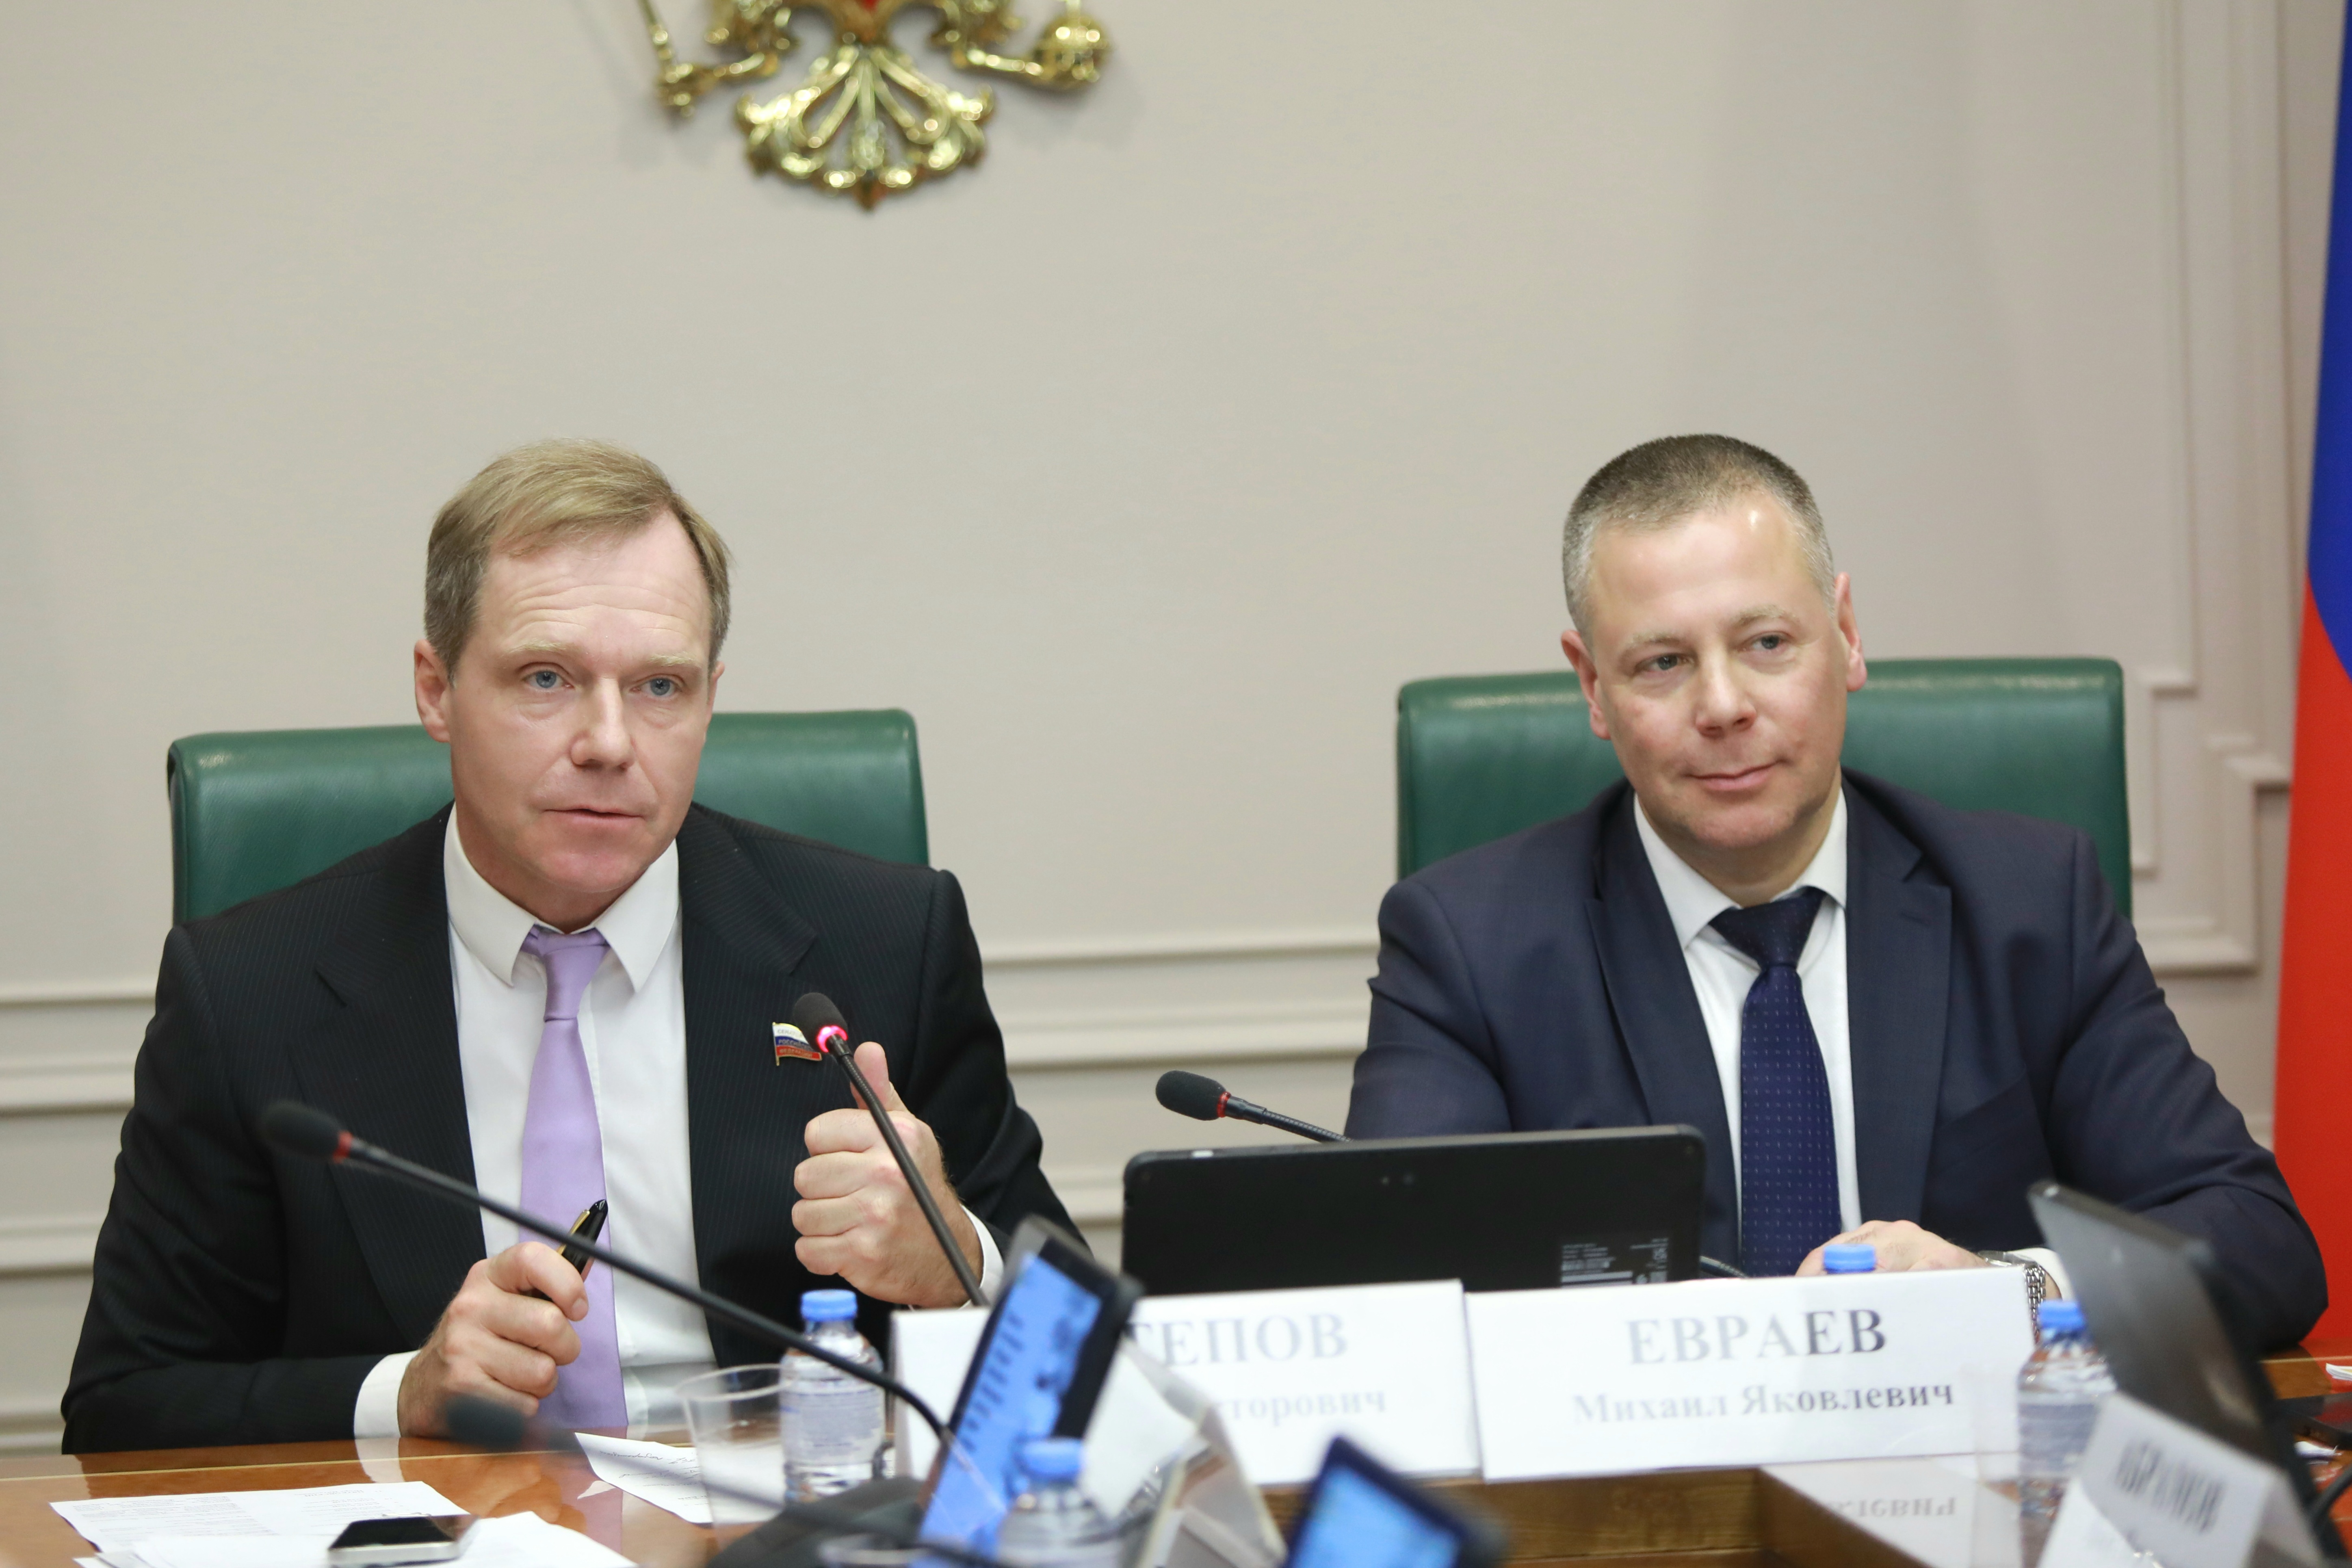 The Federation Council will support the construction and reconstruction of major road facilities in the Yaroslavl region